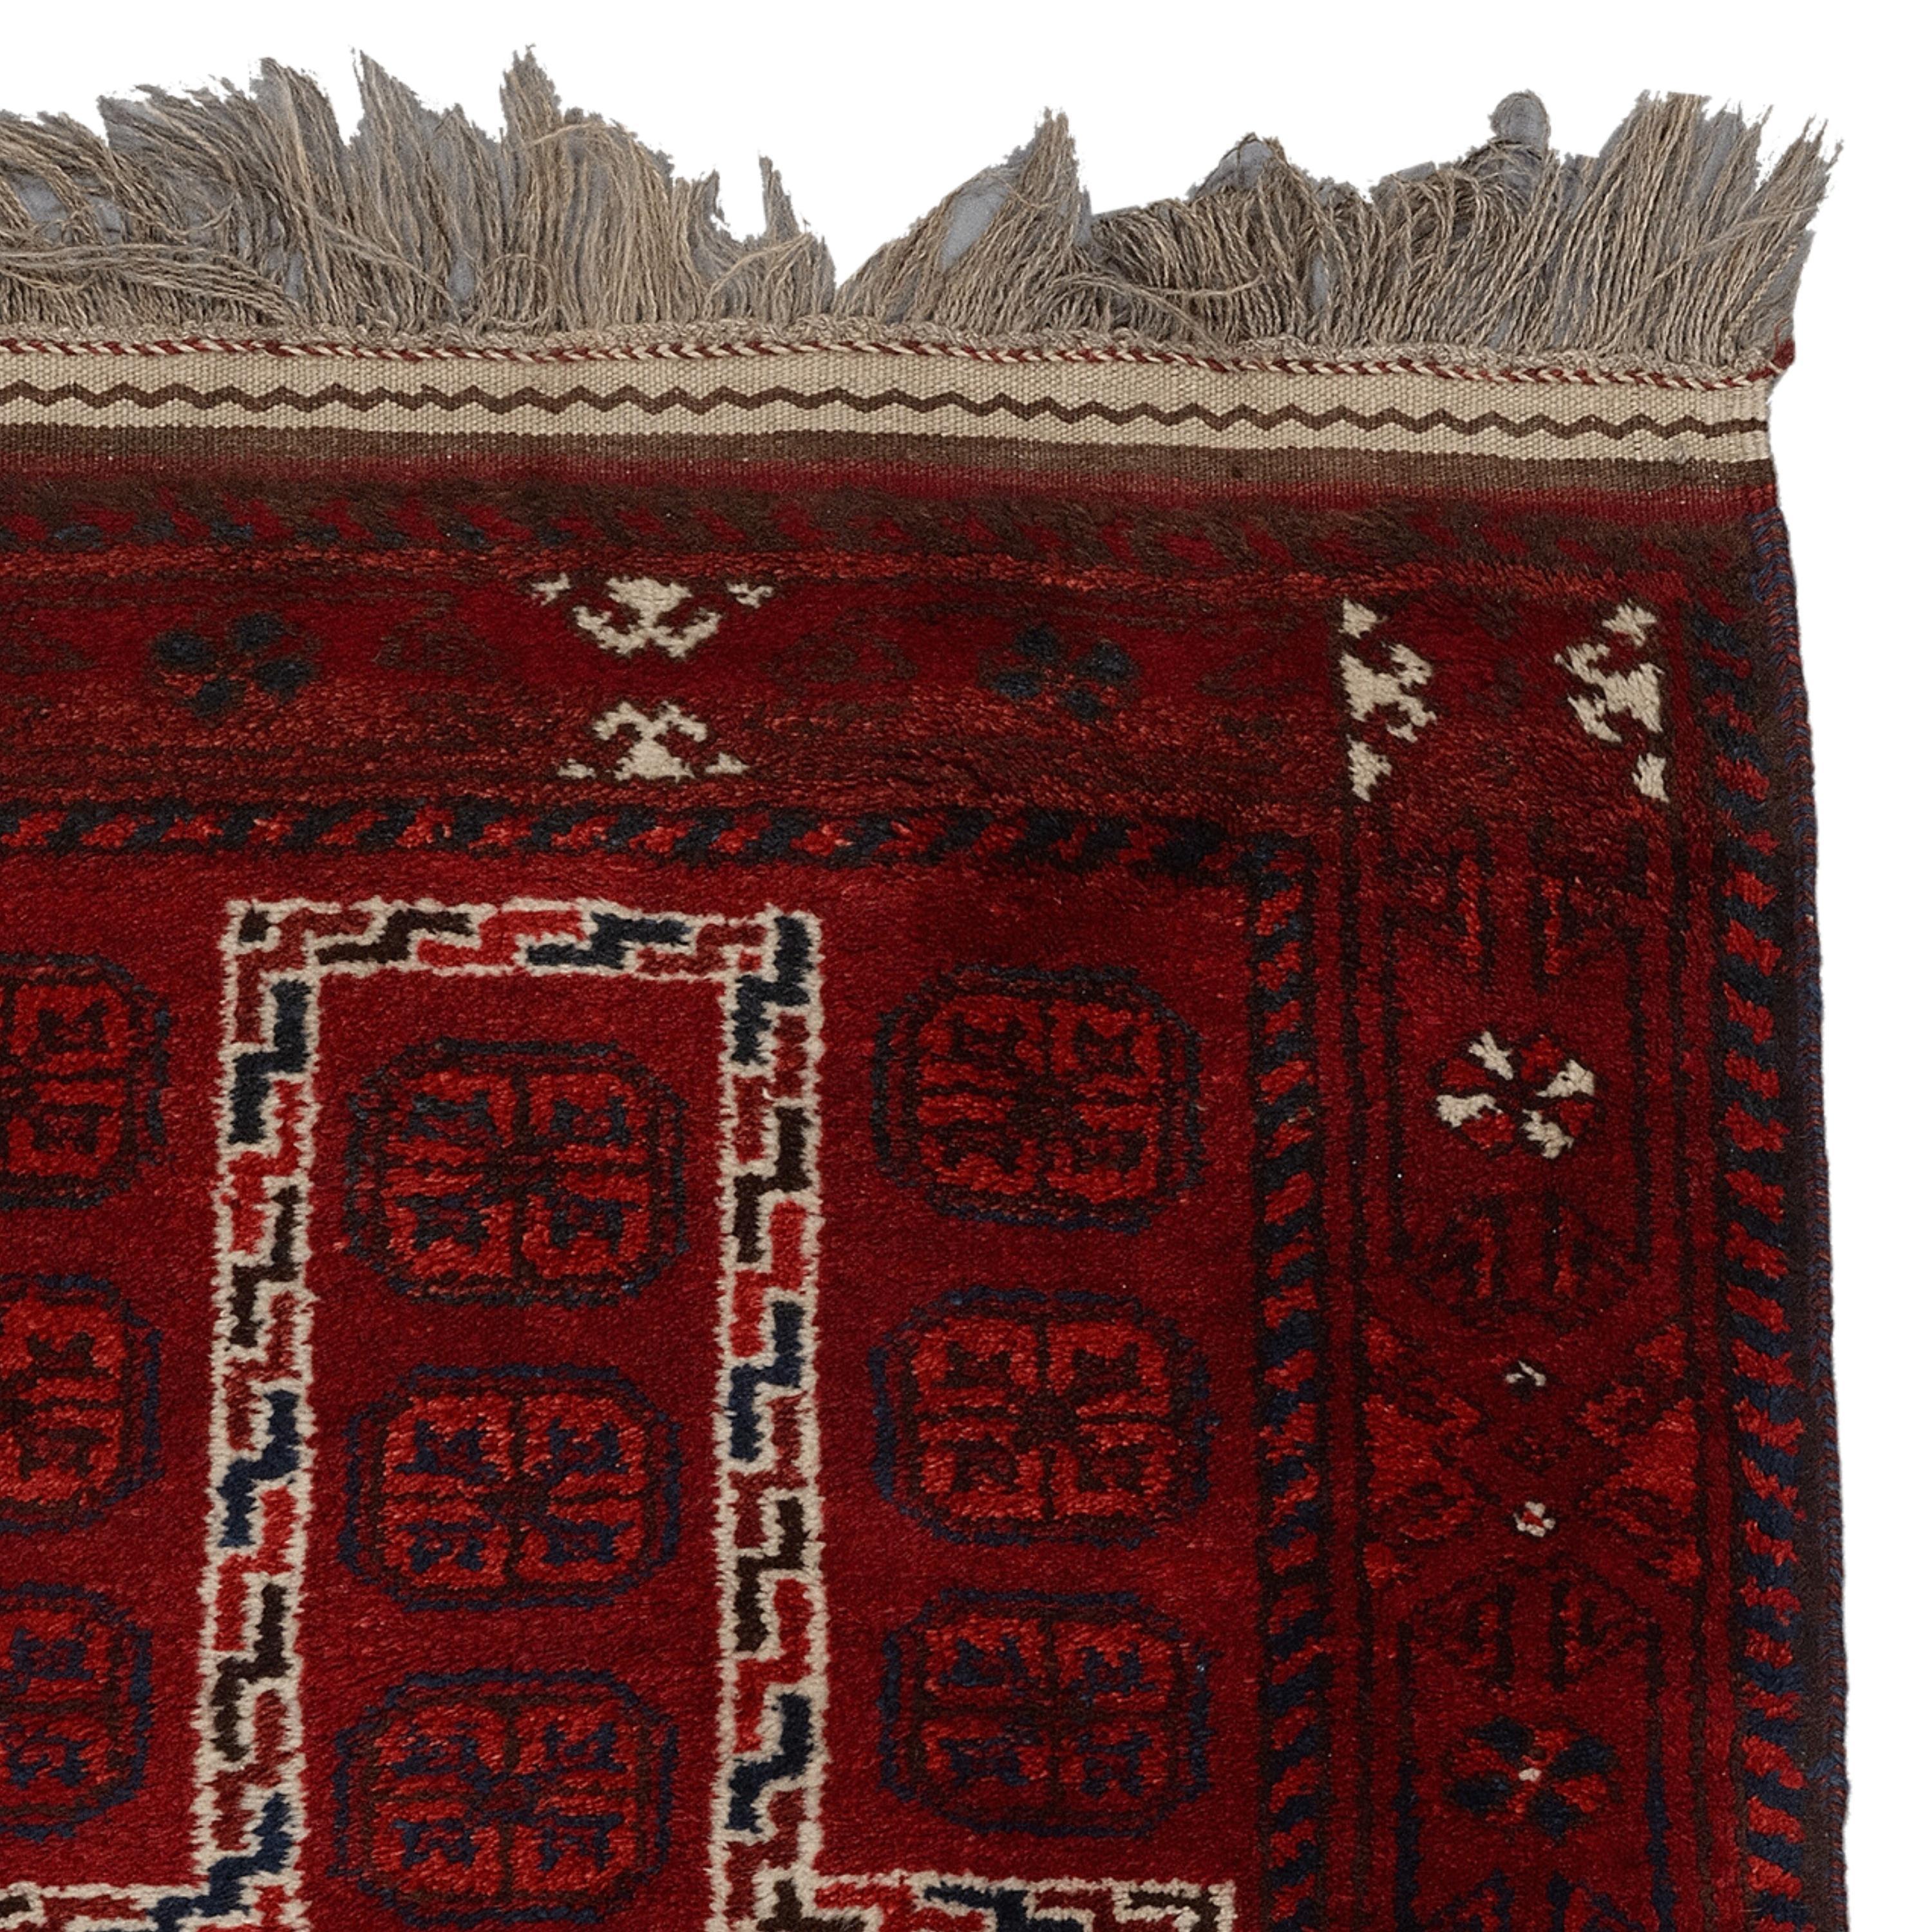 Vintage Baluch Prayer Rug - 20th Century Baluch Rug, Antique Rug, Vintage Rug In Good Condition For Sale In Sultanahmet, 34